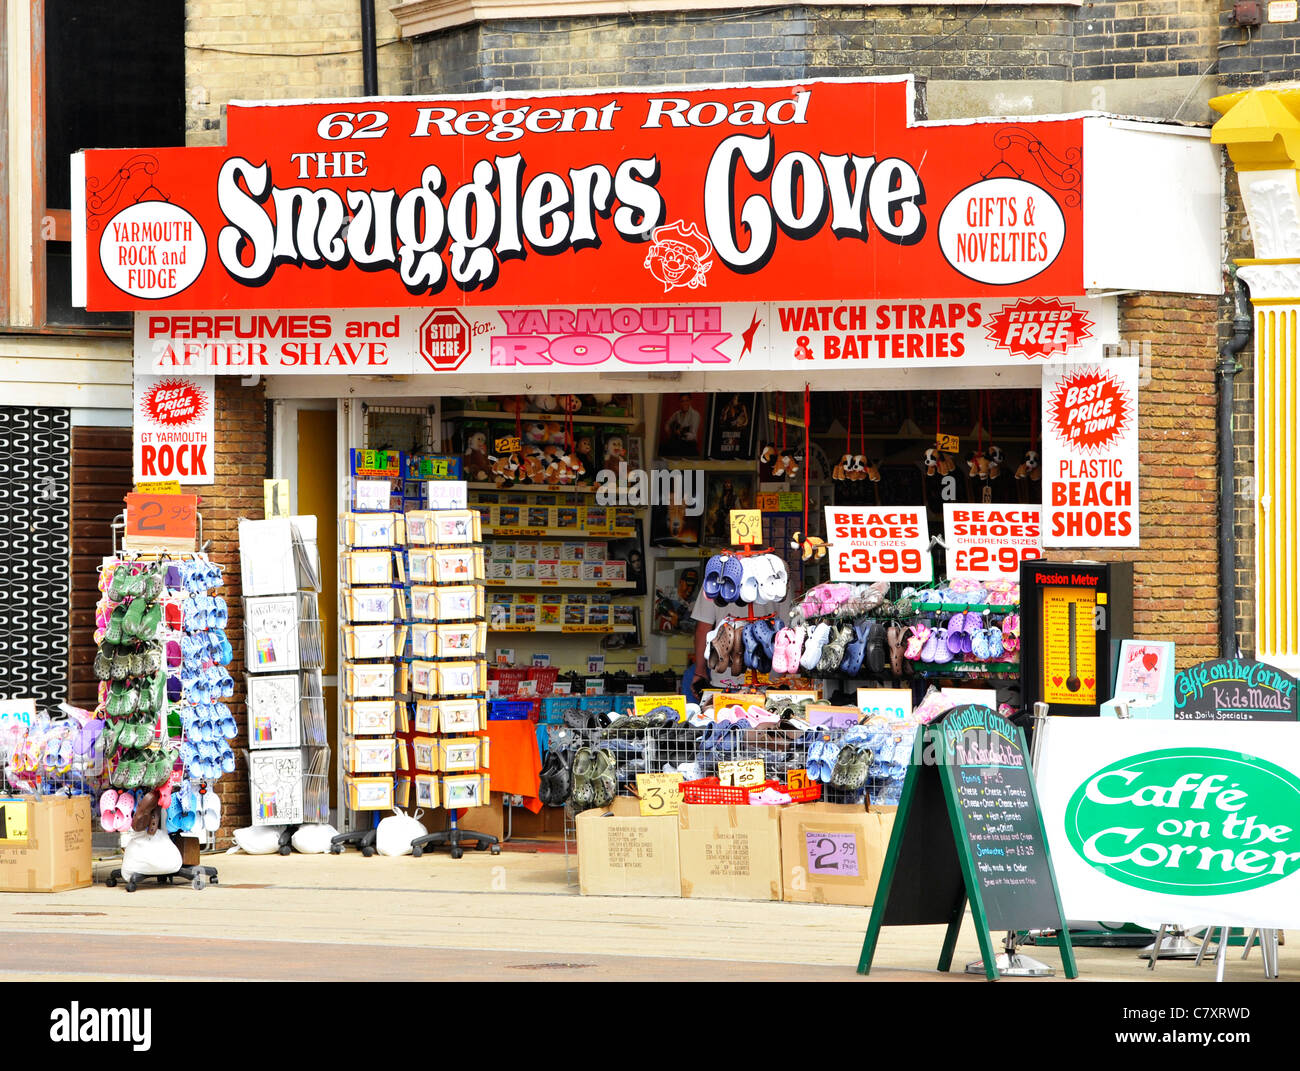 Smugglers Cove-Souvenir-Shop in Great Yarmouth, England Stockfoto